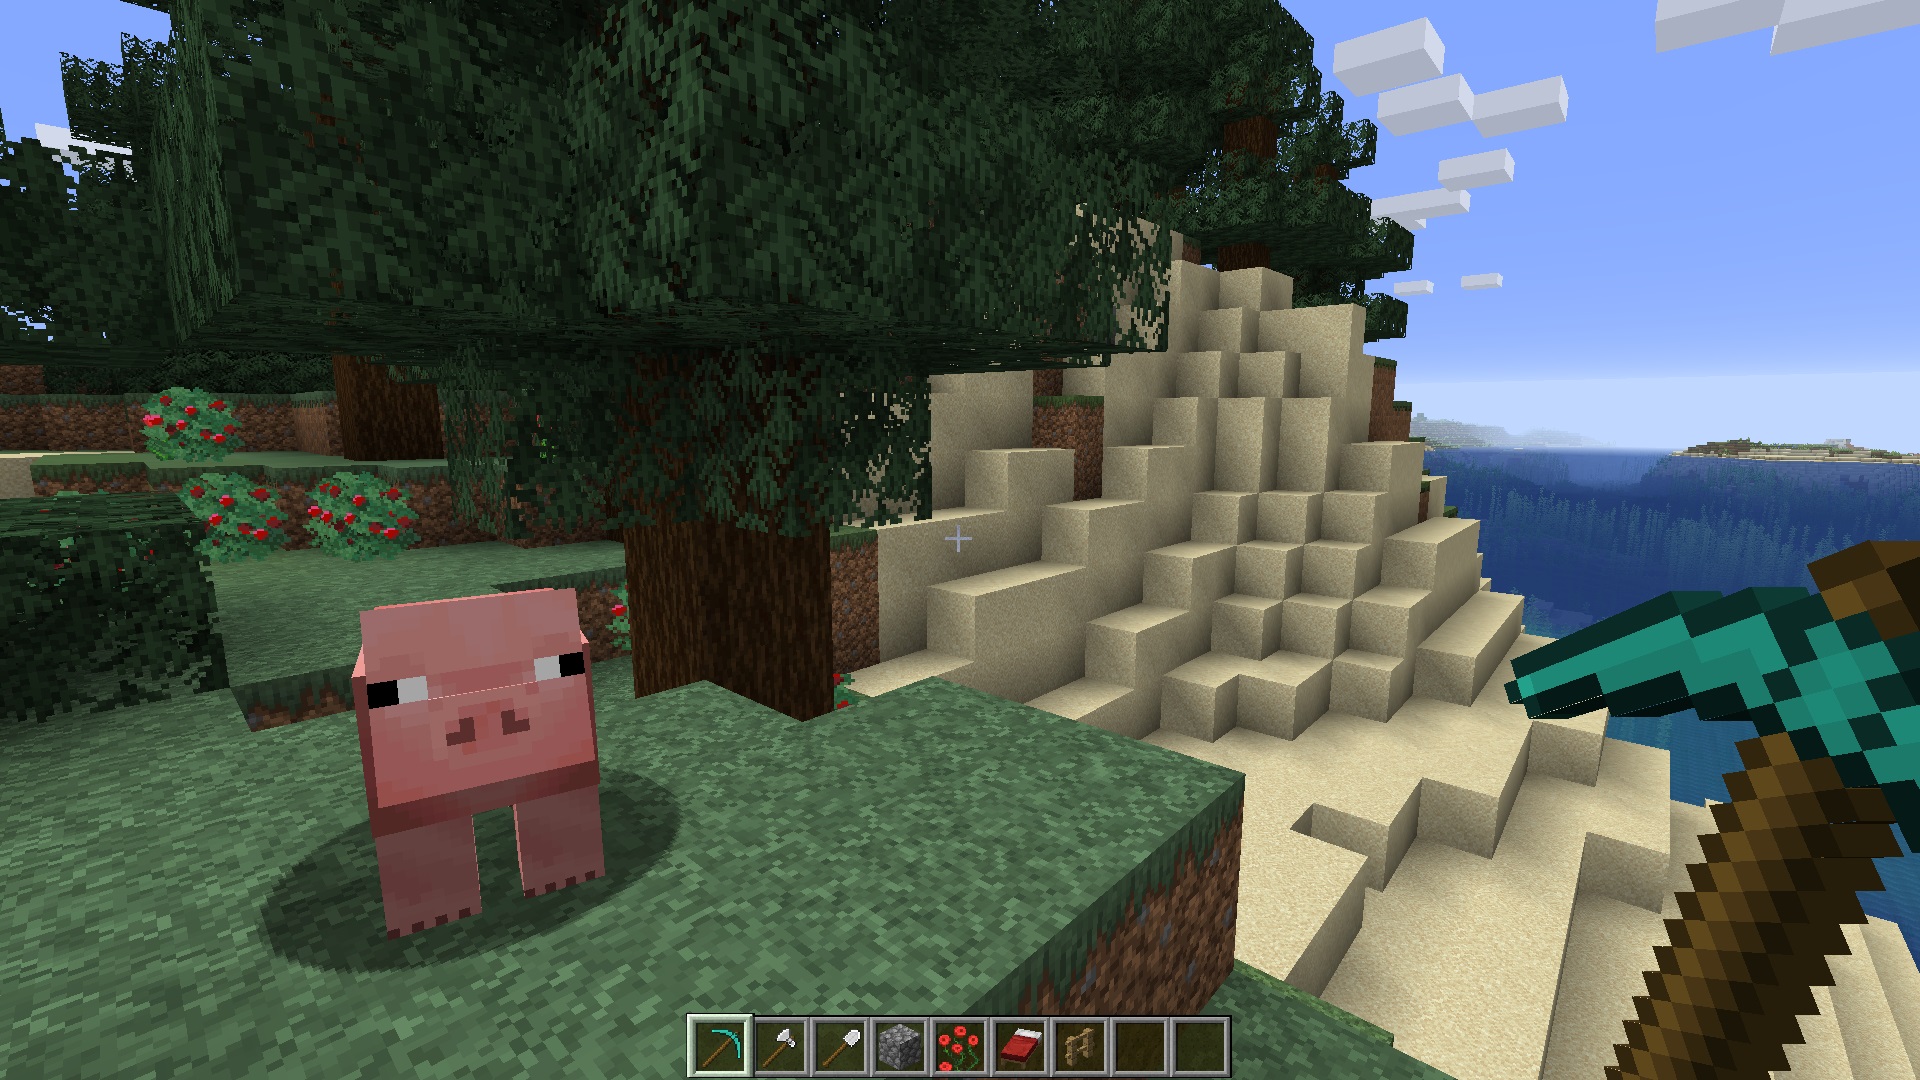 Minecraft teaxture pack - Faithful Pack - A player holding a diamond pickaxe stands in front of a pig and an oak tree in a grassy biome